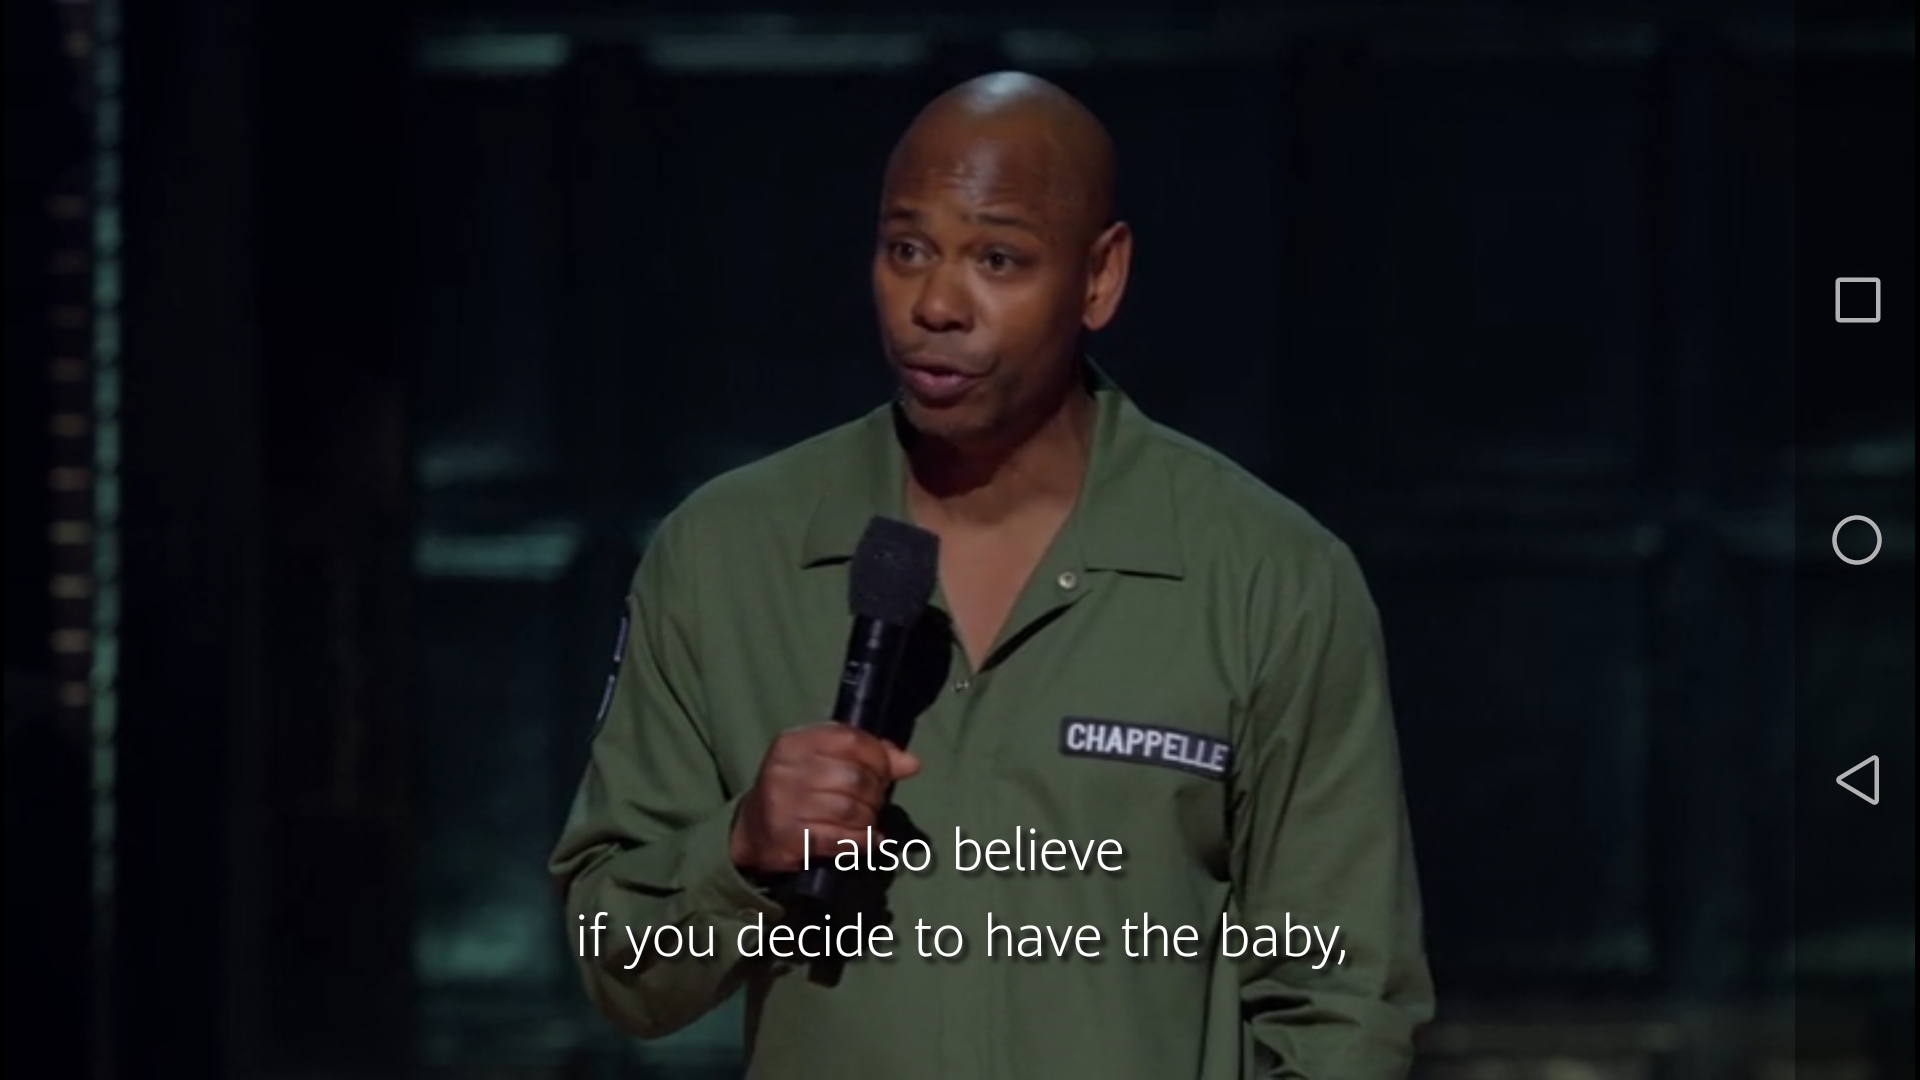 Dave Chappelle on abortion - Dave Chappelle, Prohibition of abortion, Storyboard, Choice, Longpost